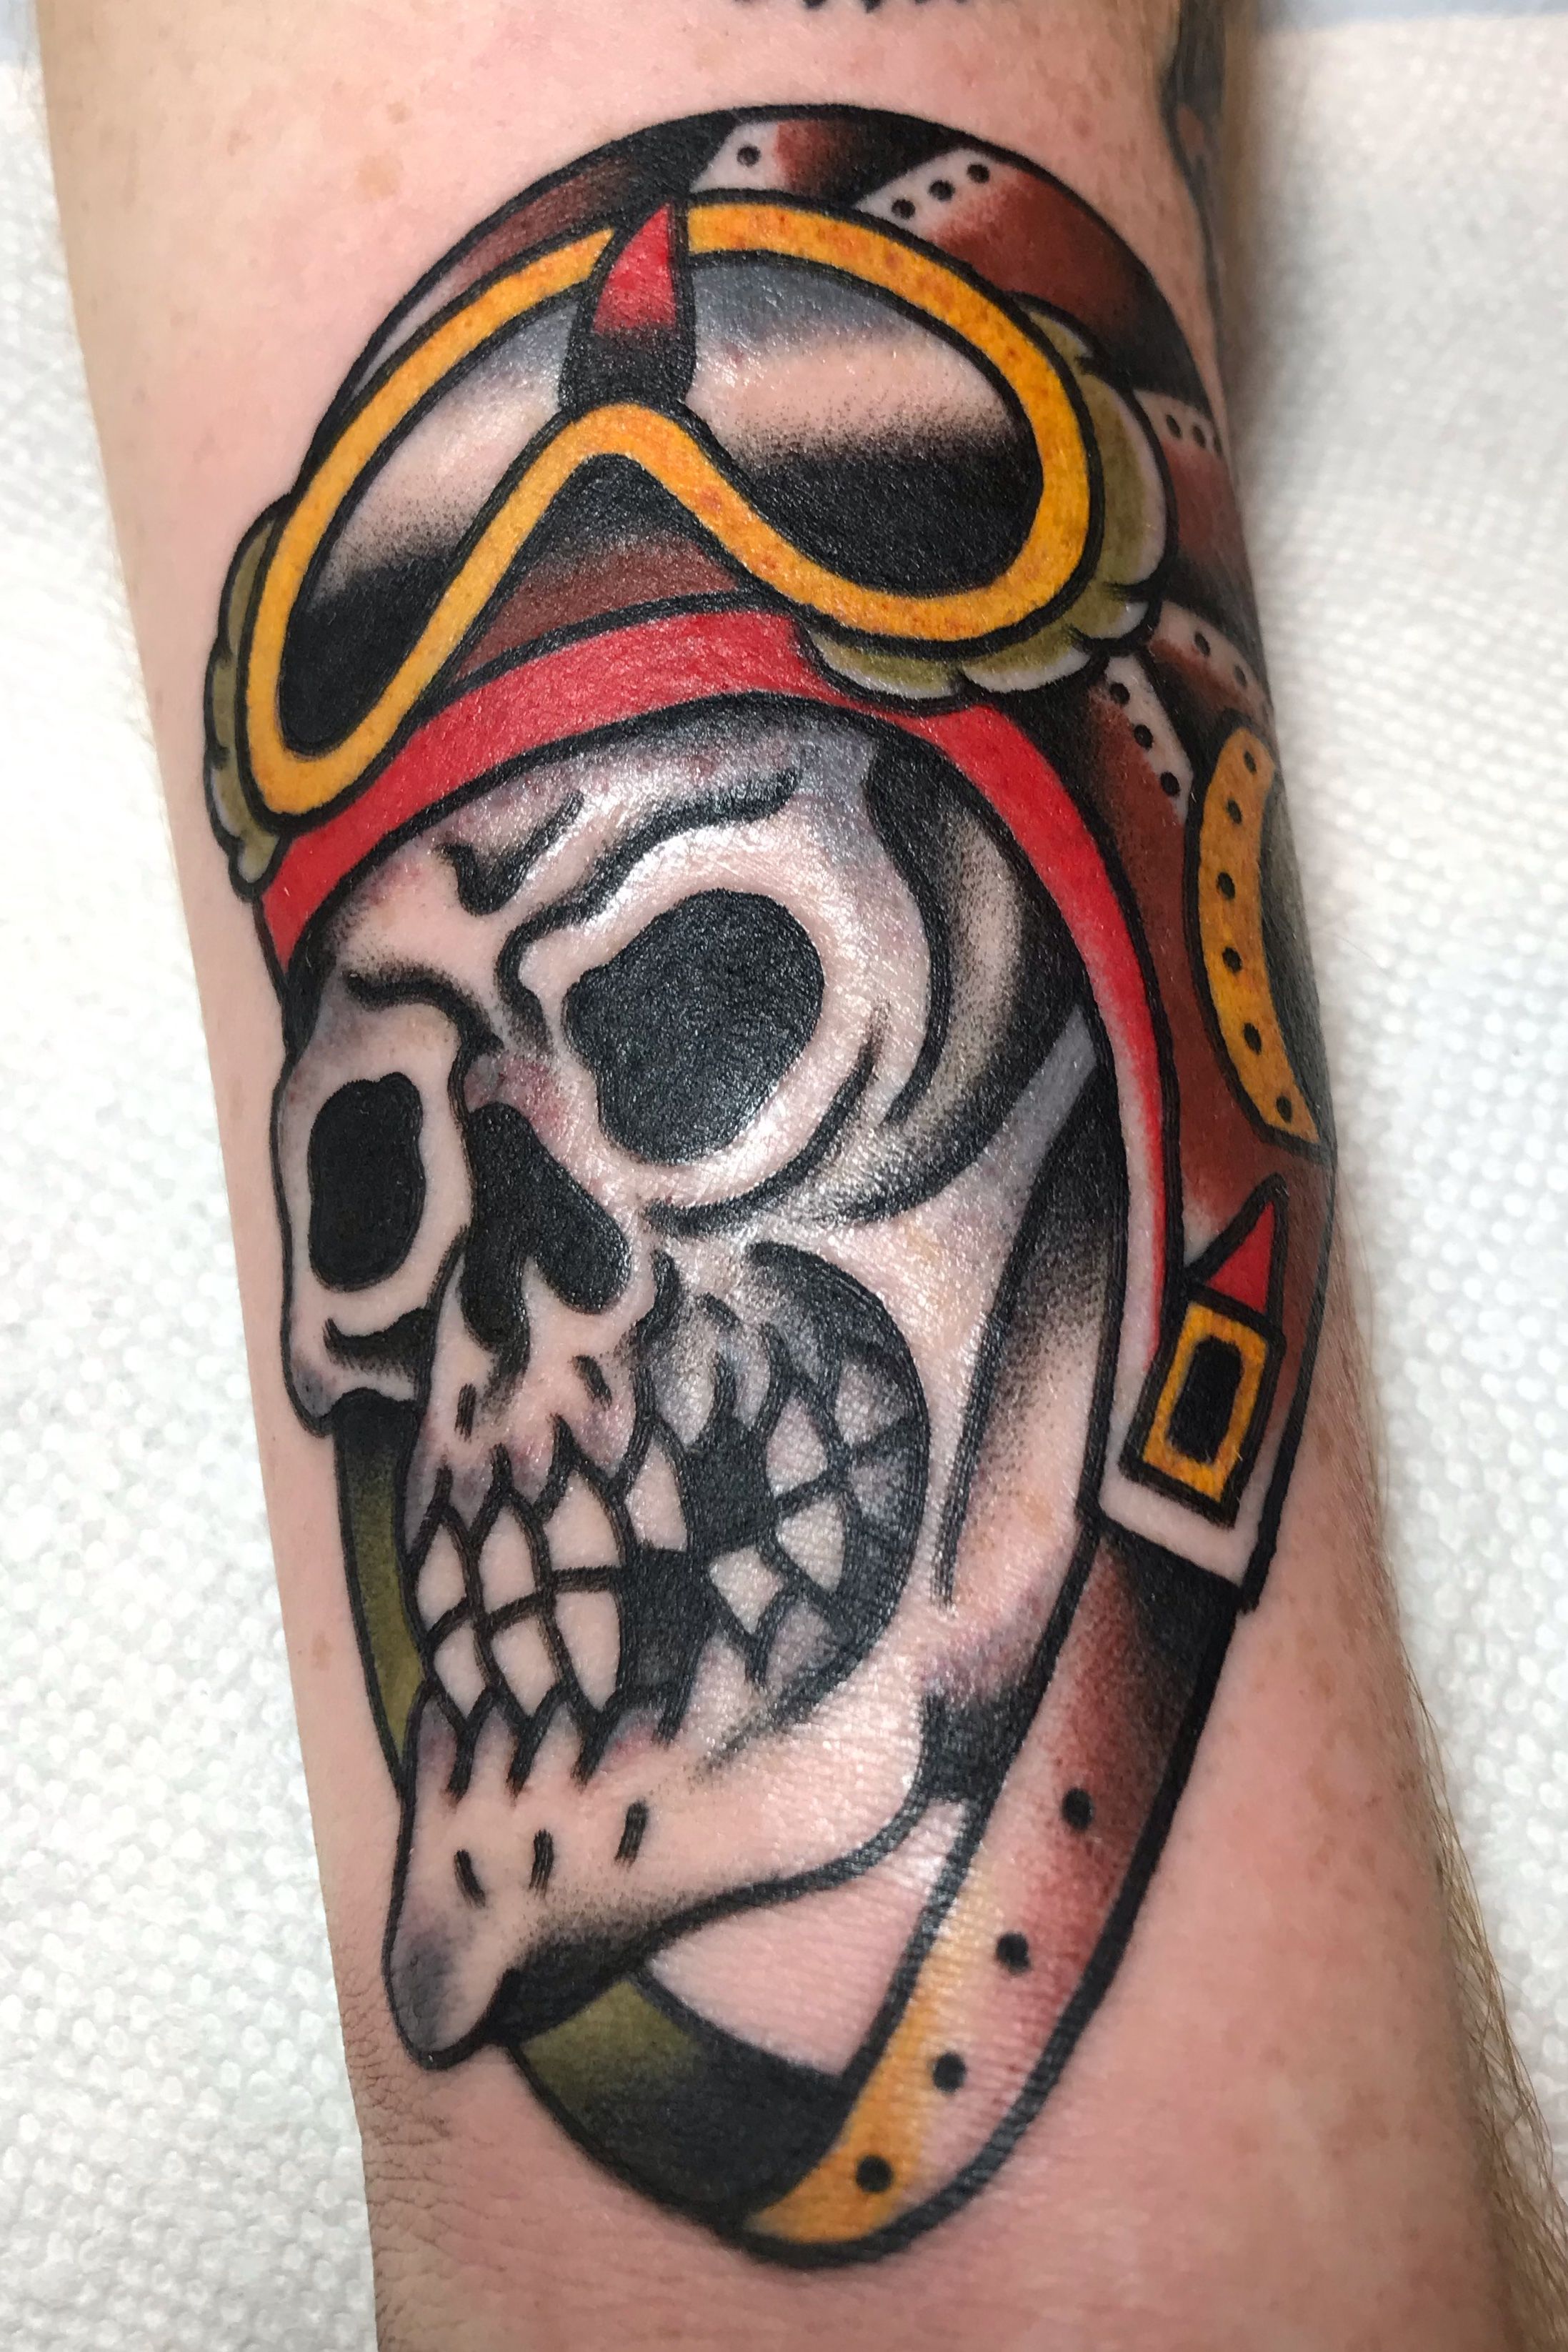 Skull tattoo by Todd Showdown To book your own tattoo with Todd, check out  his Instagram @toddshowdown for more details and to see more ... | Instagram